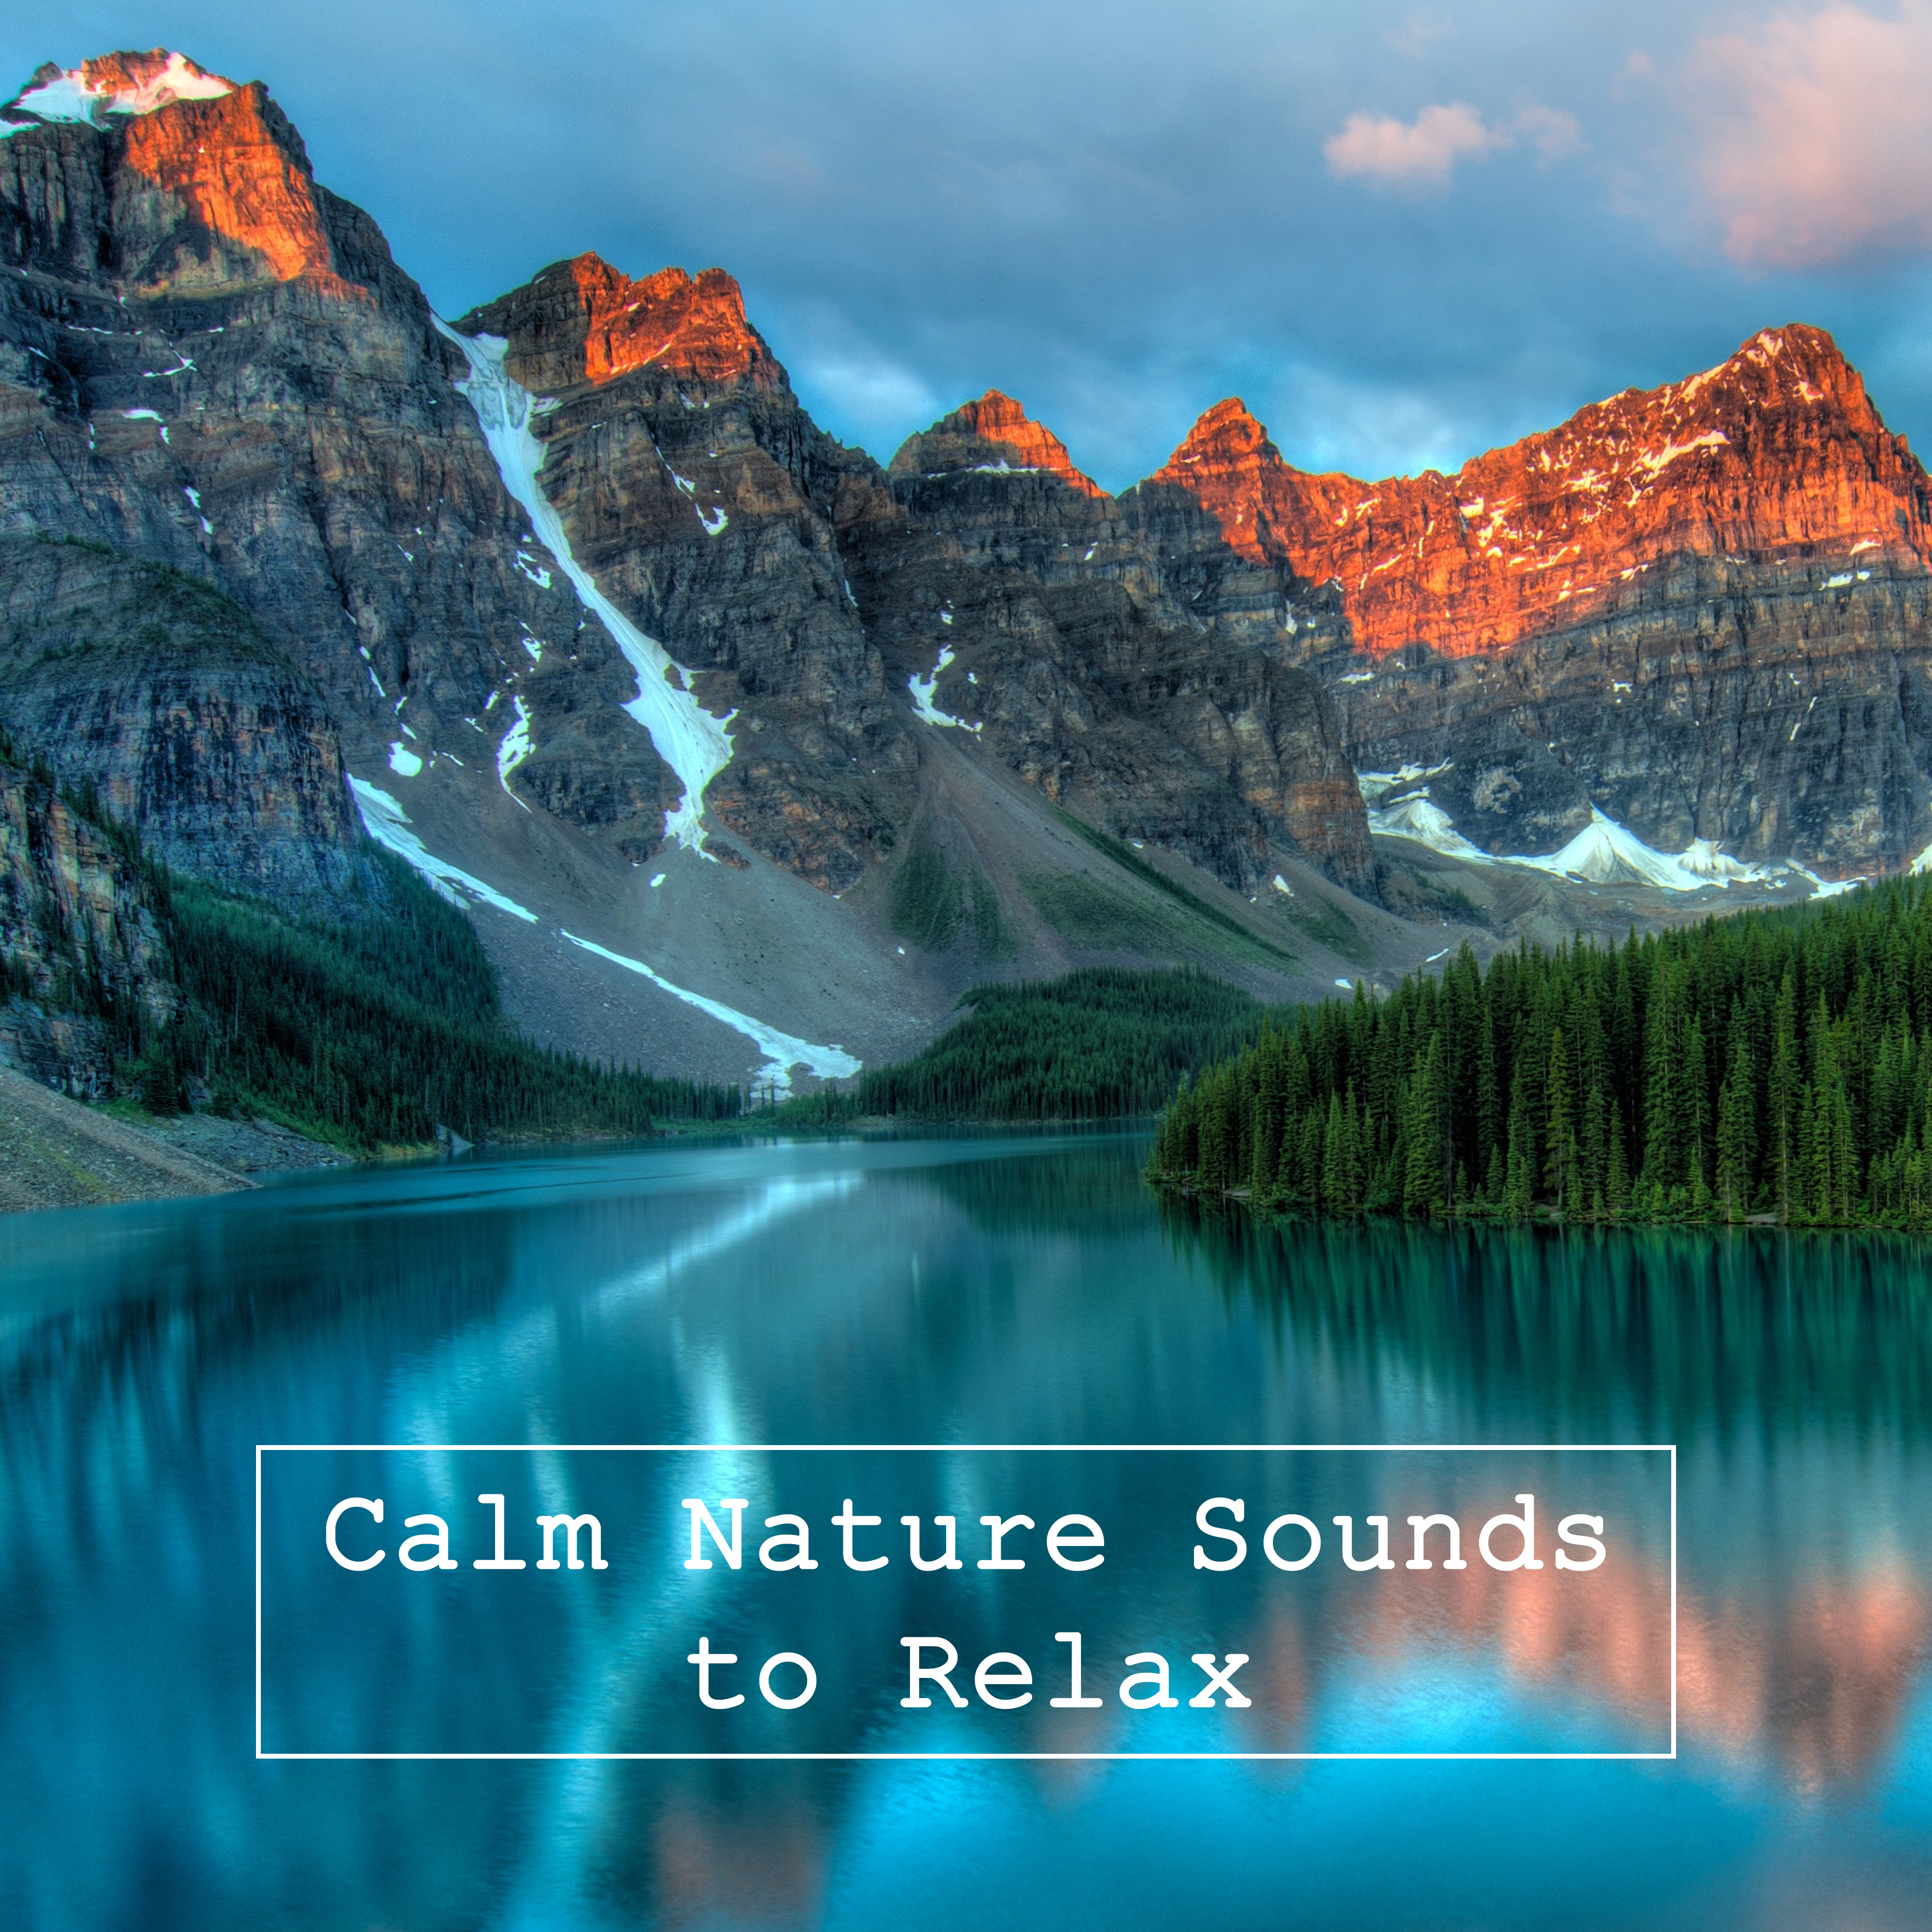 Calm Nature Sounds to Relax  Chilled Waves, Songs to Rest, Rain Sounds, Water Relaxation